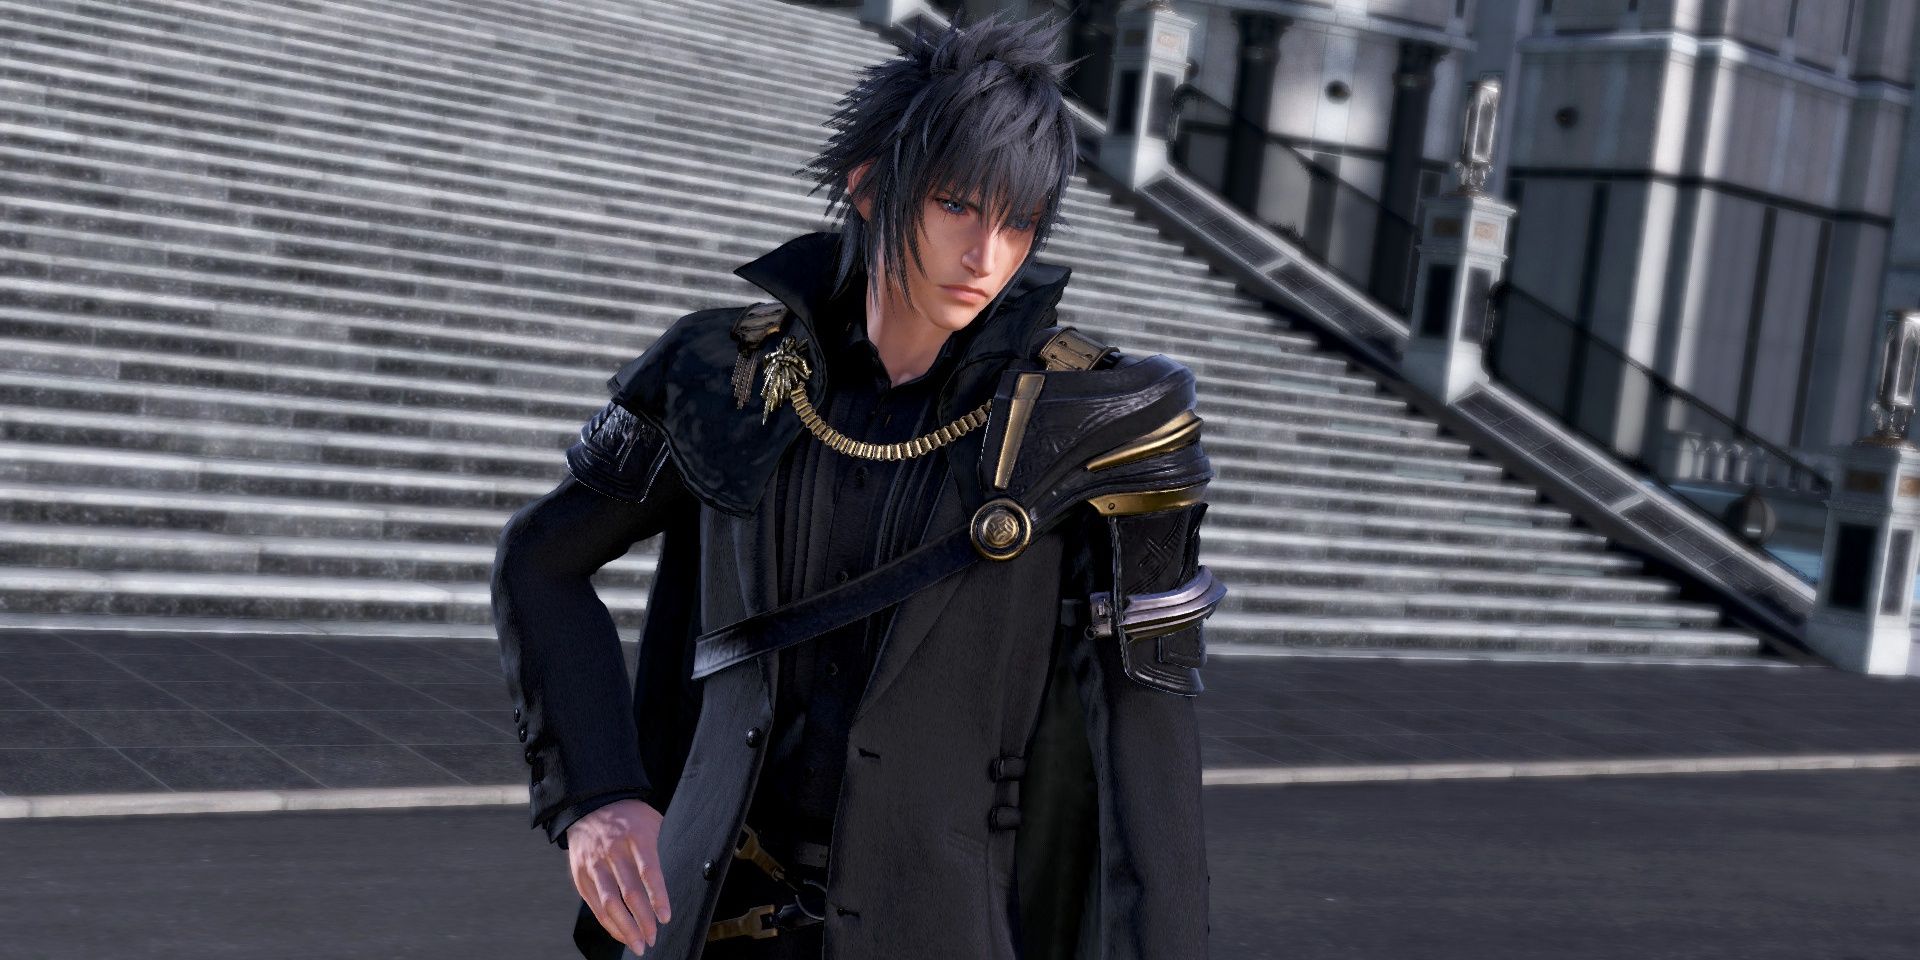 noctis standing by palace stairs in royal clothing